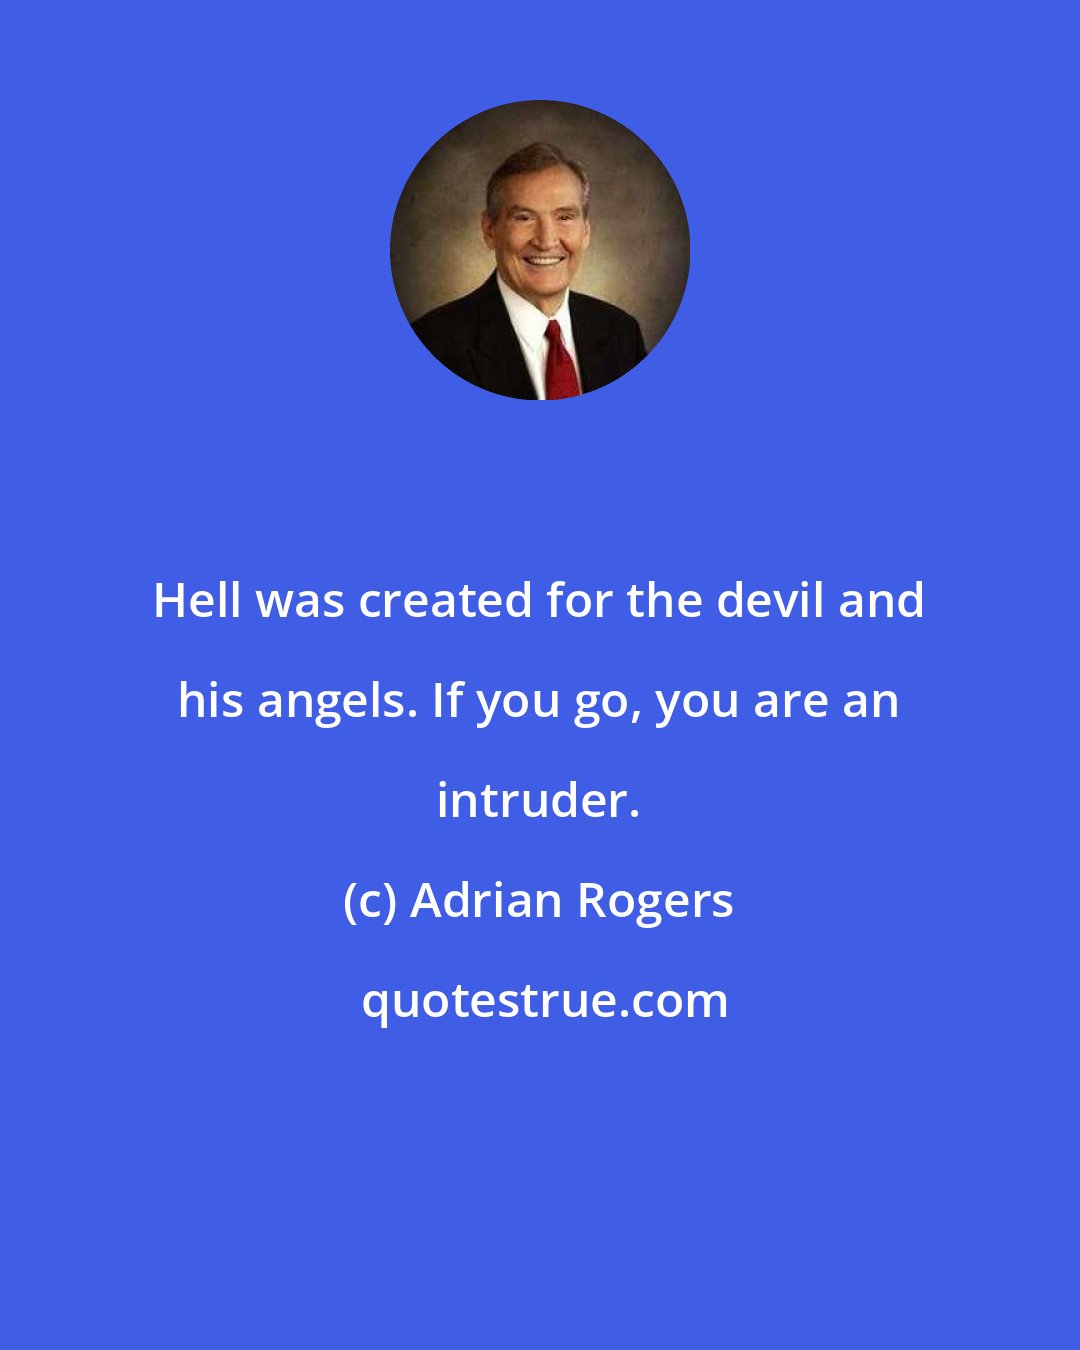 Adrian Rogers: Hell was created for the devil and his angels. If you go, you are an intruder.